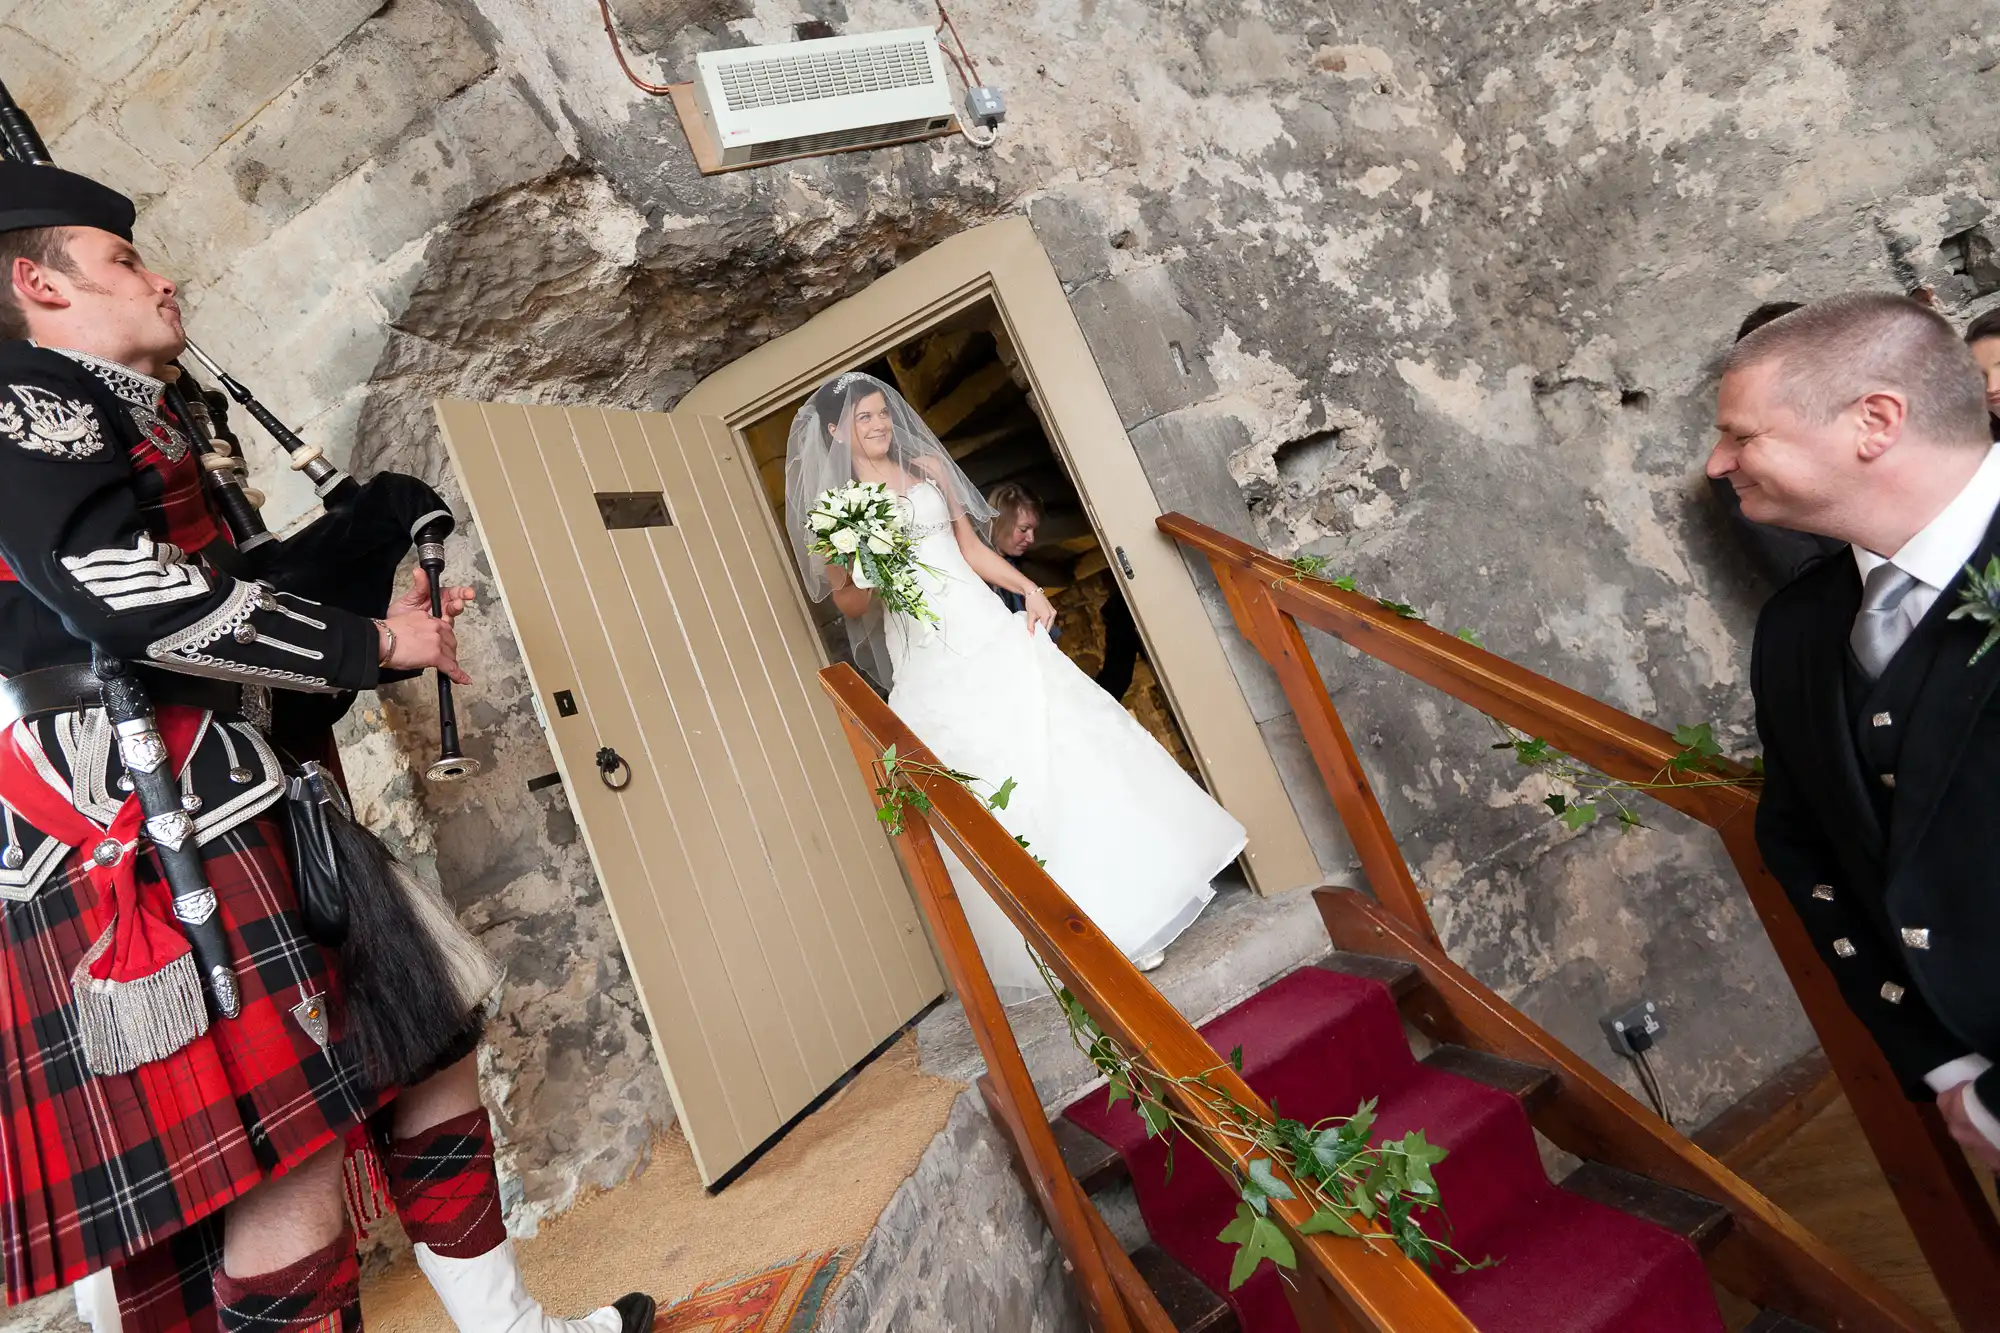 A bride in a white dress holding a bouquet descends stairs at a wedding venue, greeted by a man in a kilt and another man in a suit.